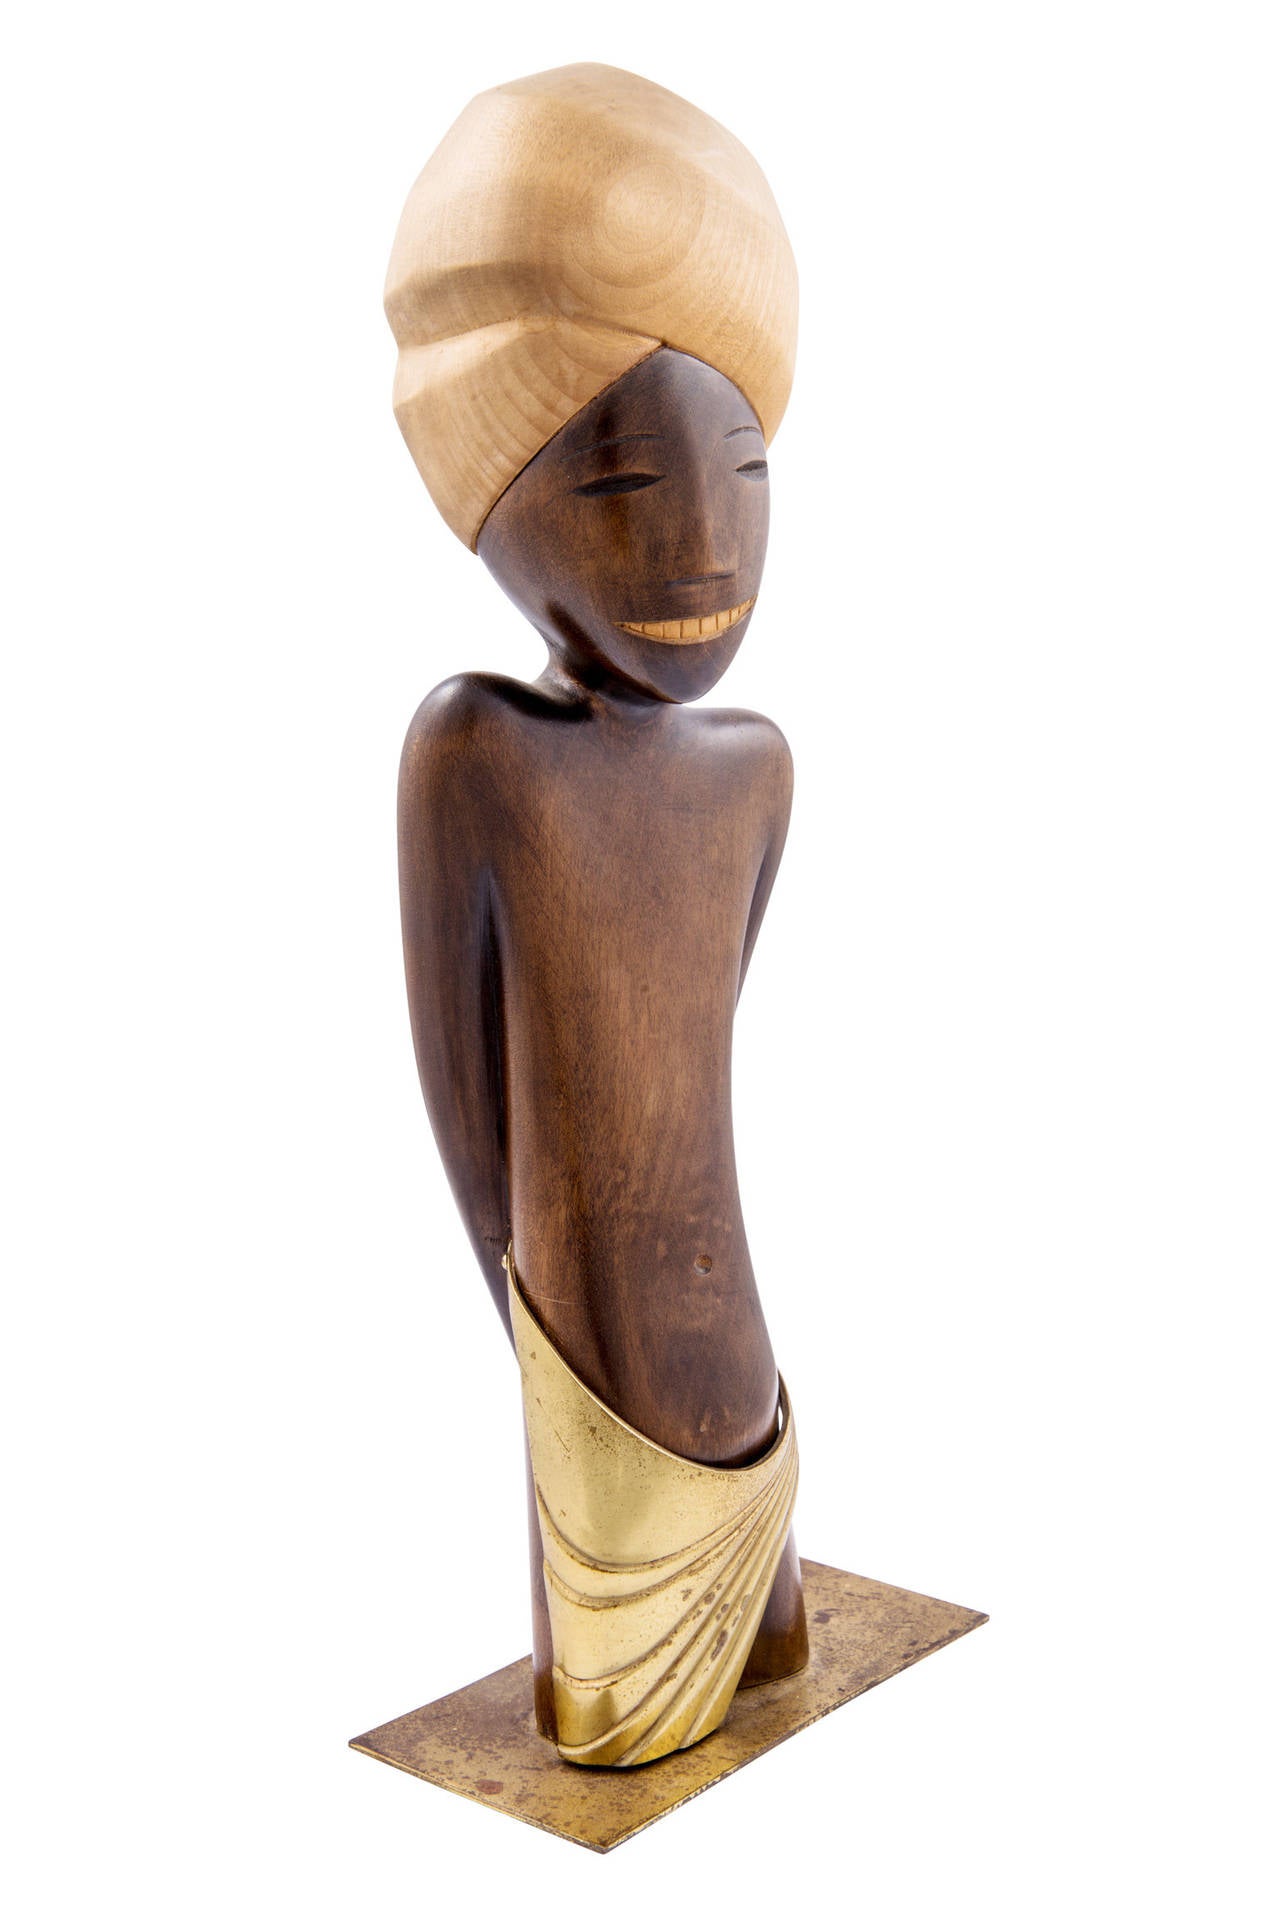 Starting in the 1930s, the Werkstatte Hagenauer produced objects with African backgrounds. In the 1950s, these objects experienced a revival and for the first time, male African sculptures were displayed and the product range of animals was widened.